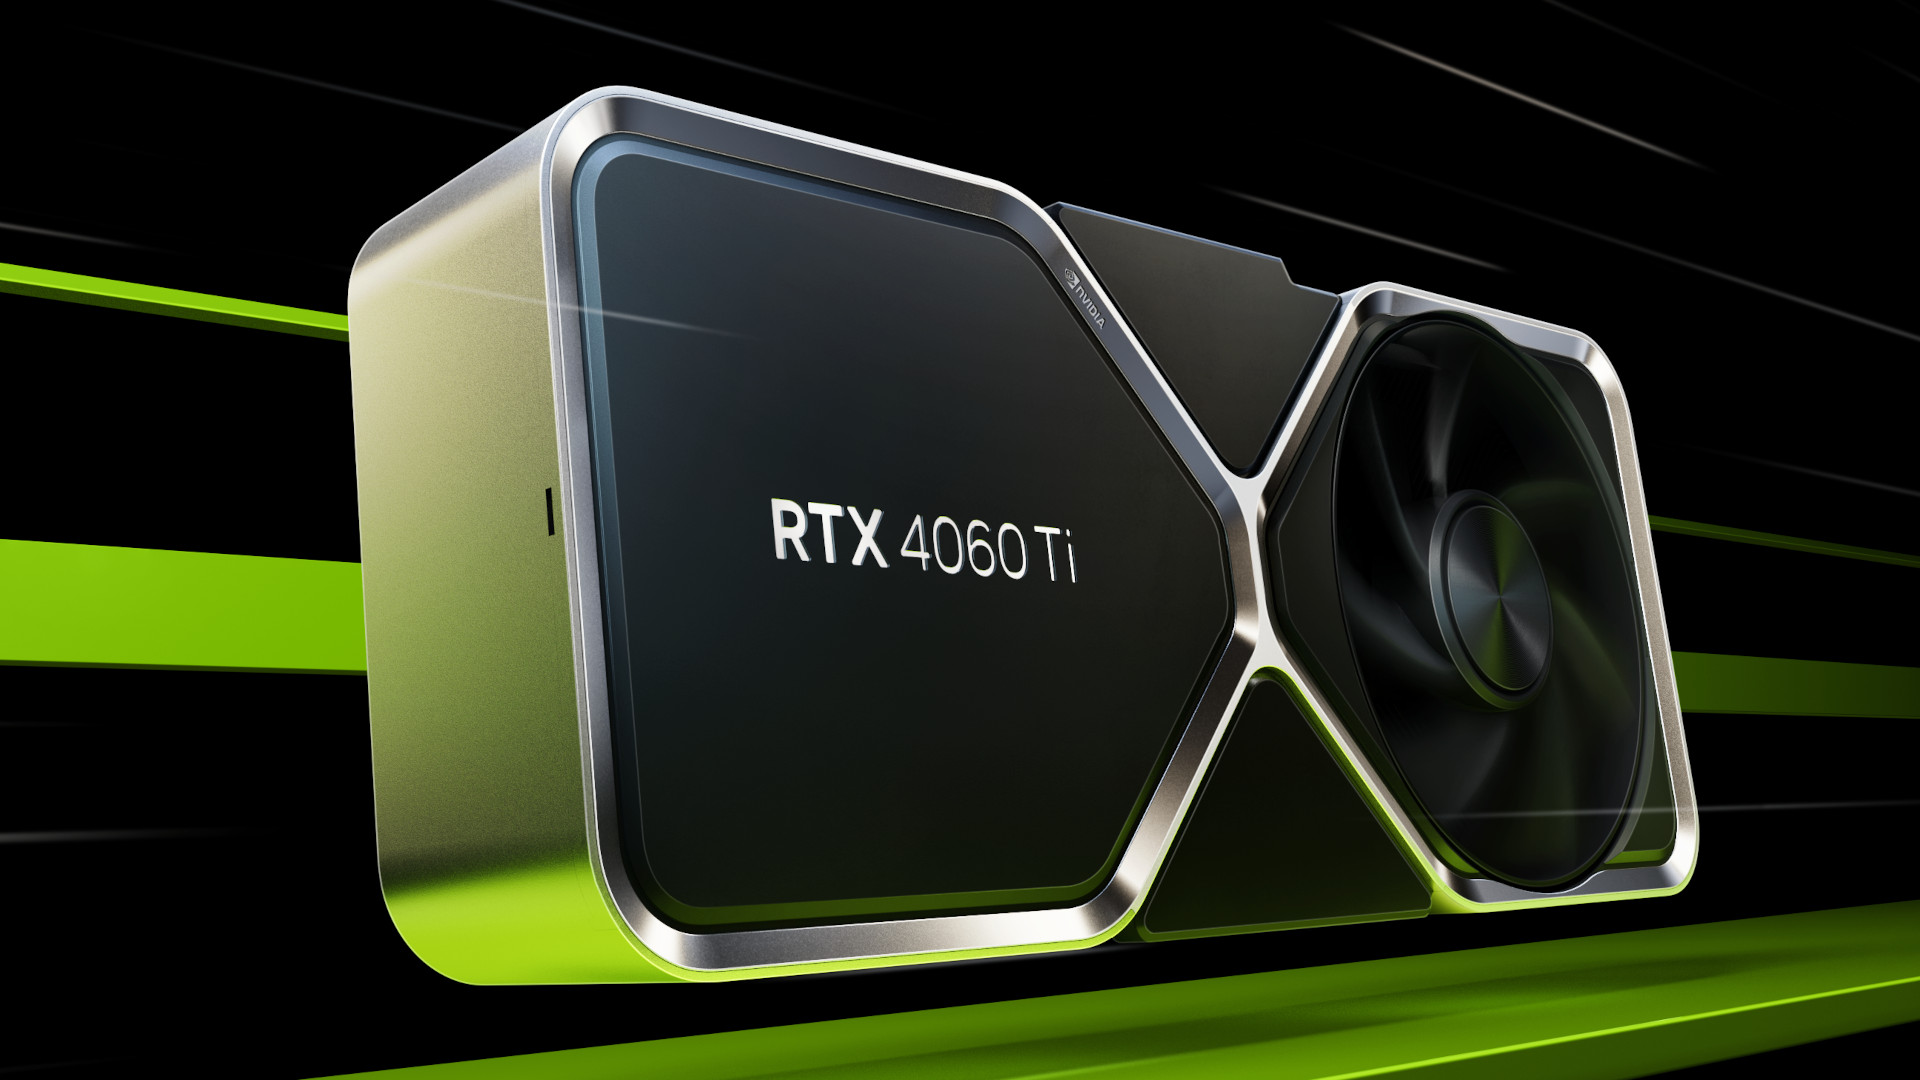 Nvidia is giving away 460 RTX 4060 family cards